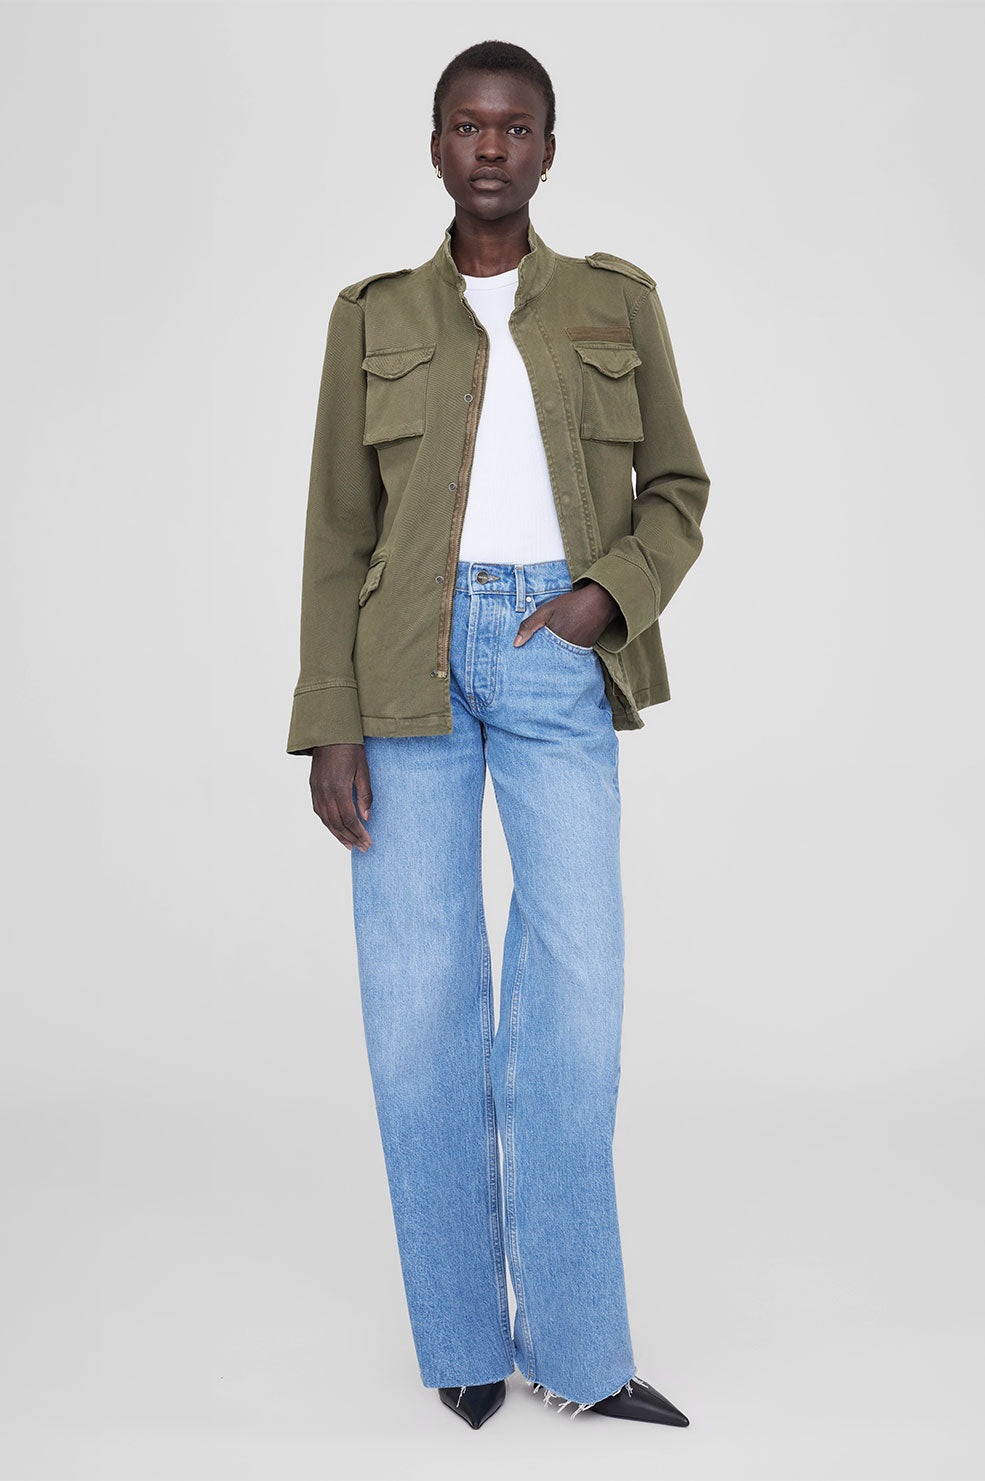 Essentials Women's Utility Jacket Is Perfect for Fall